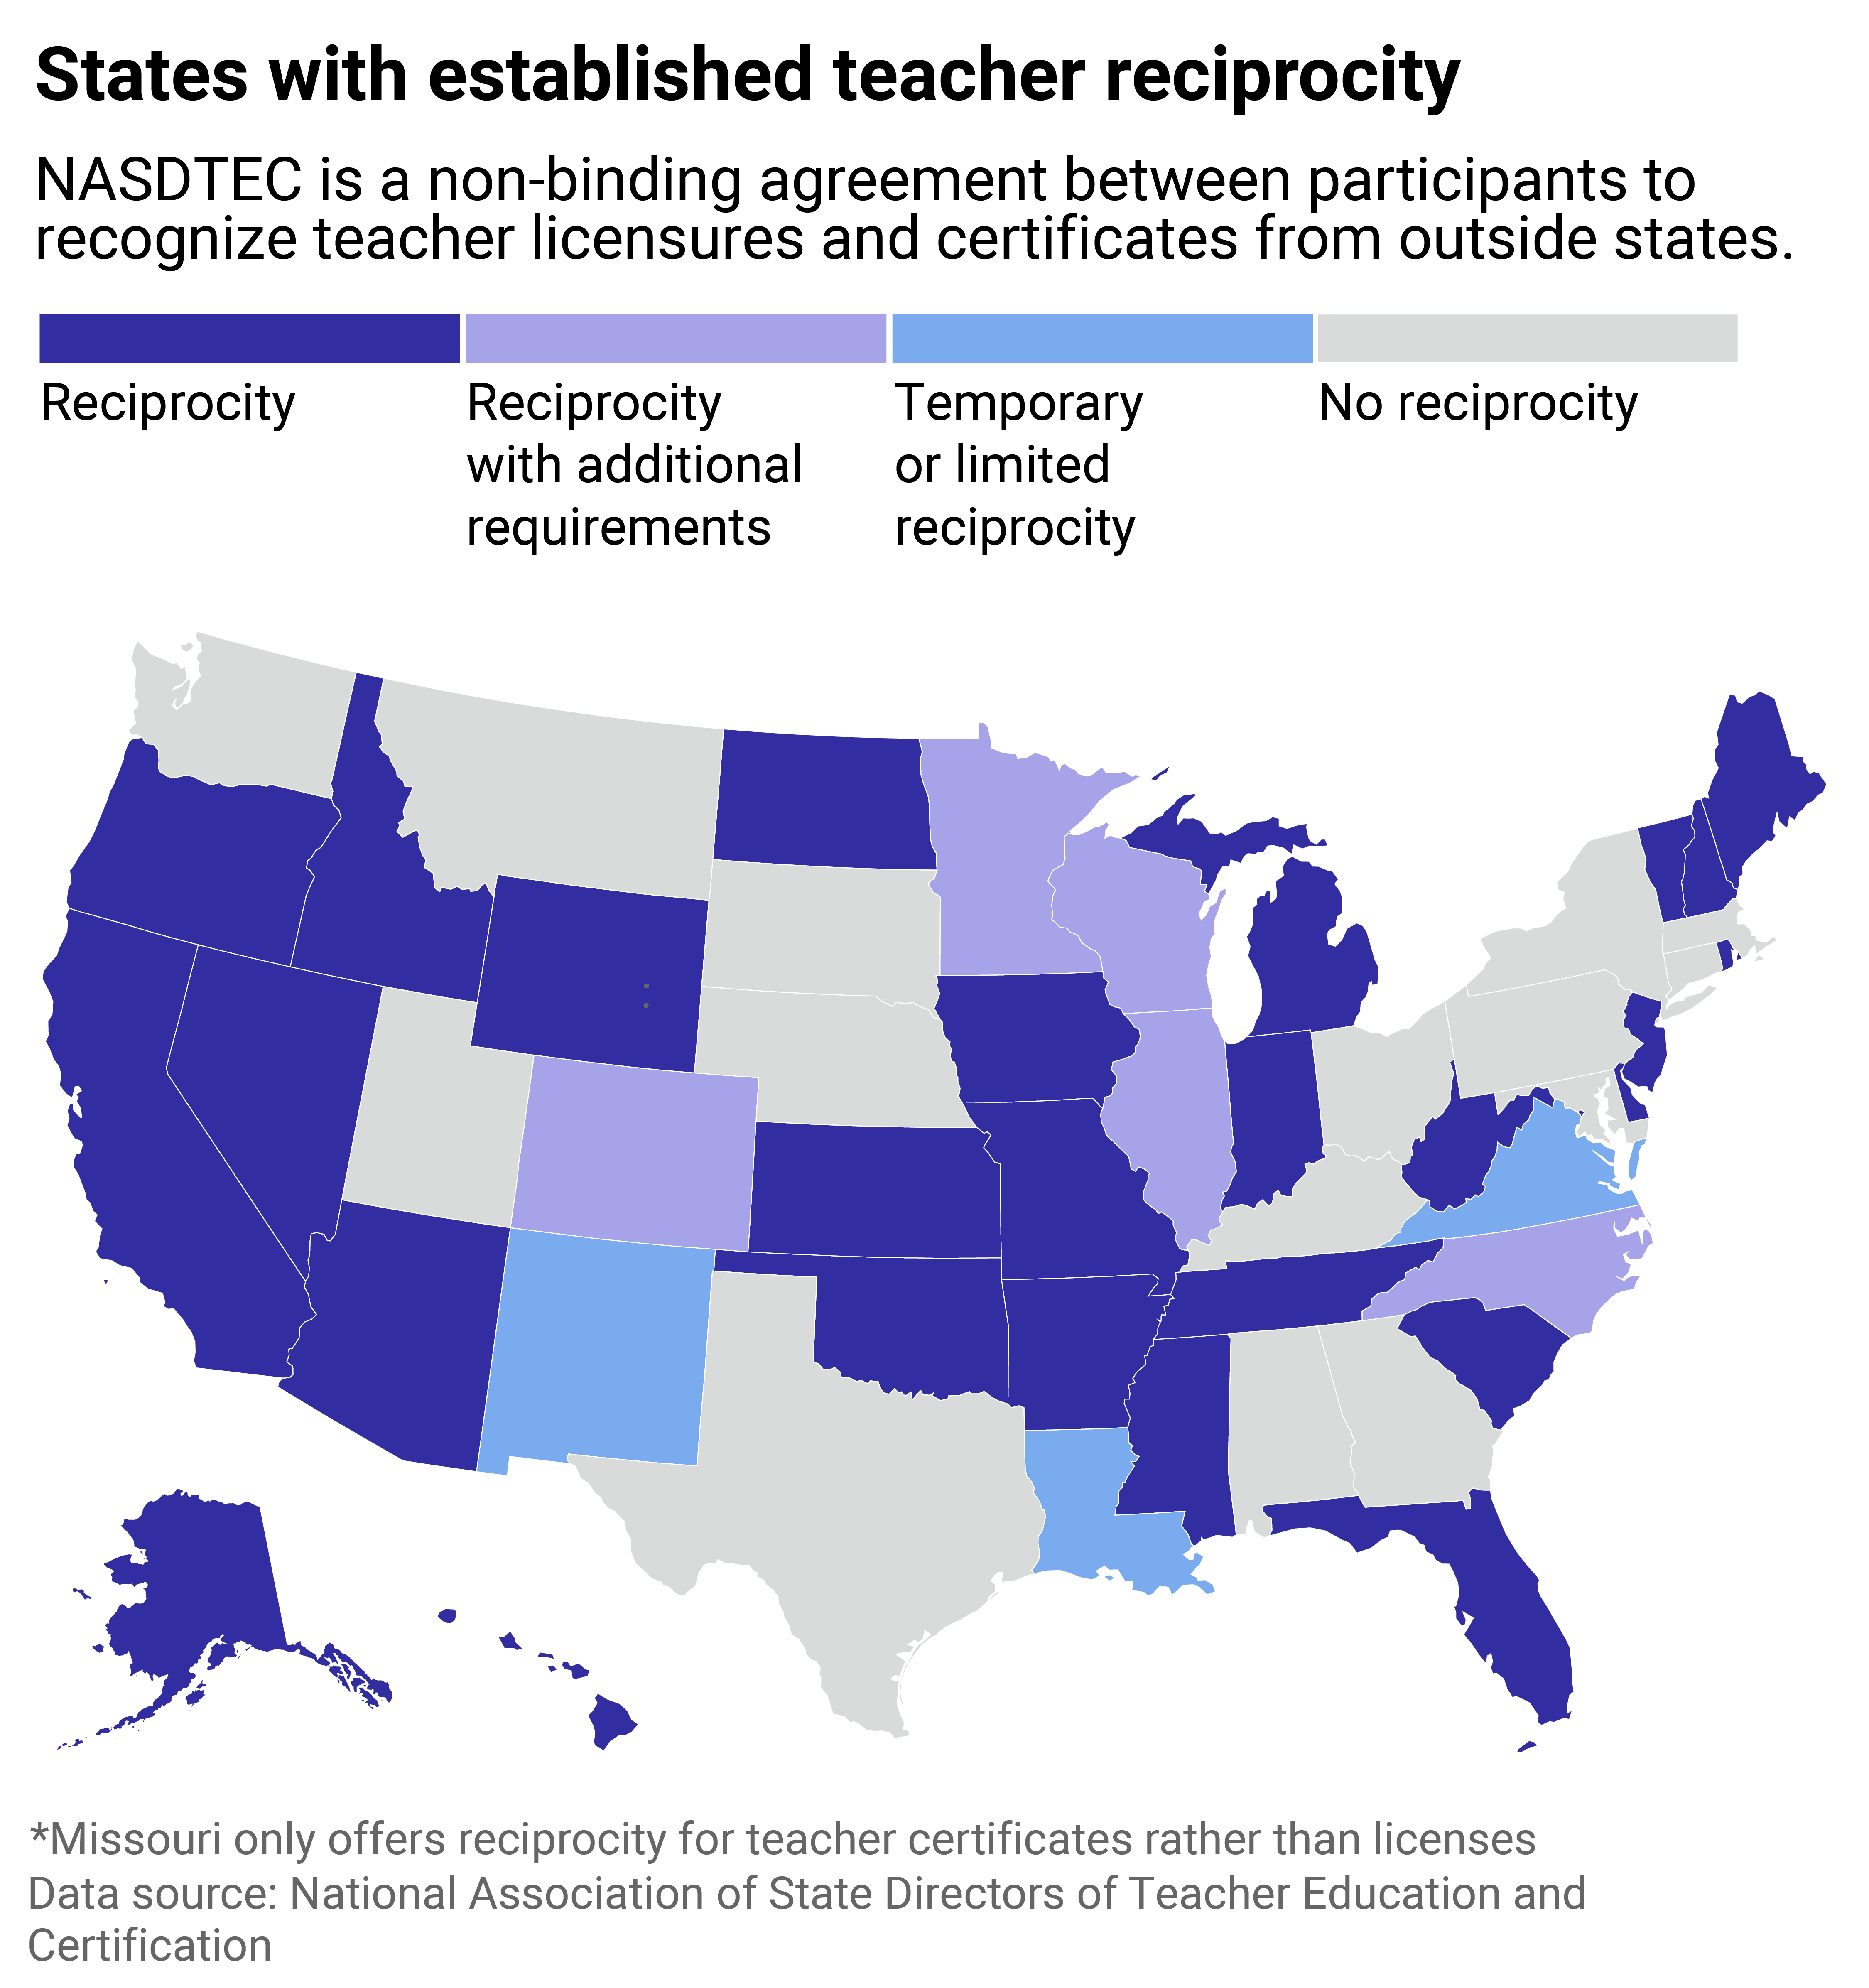 Map showing states with established teacher reciprocity programs.